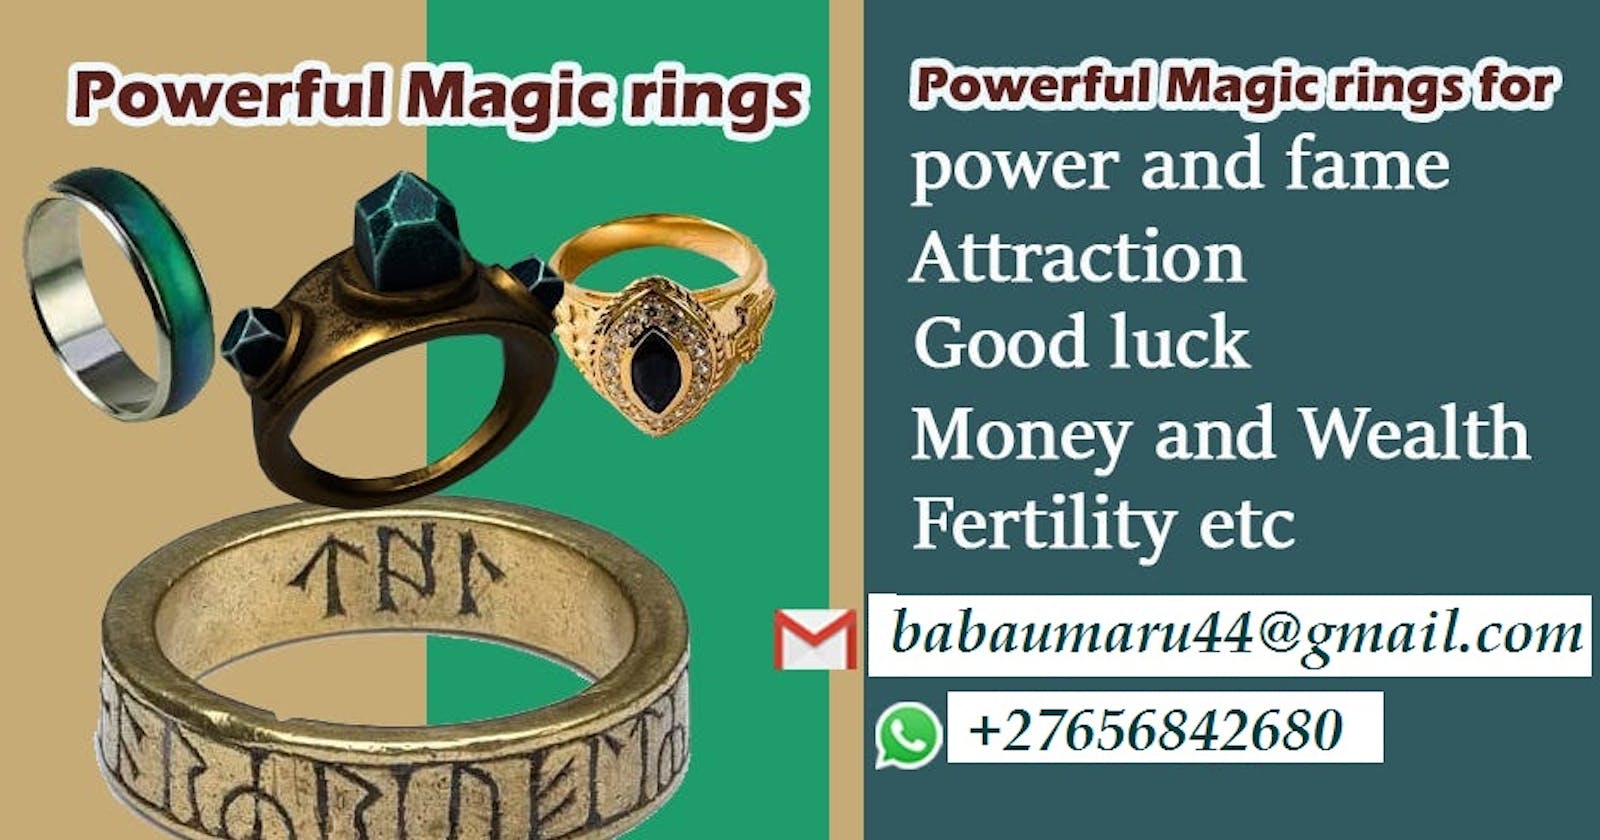 Magic Rings For Money, Fame And Power  In Navahrudak
Town in Belarus Call ☏ +27656842680 Magic Ring For Love And Marrige In Kariega Town South Africa